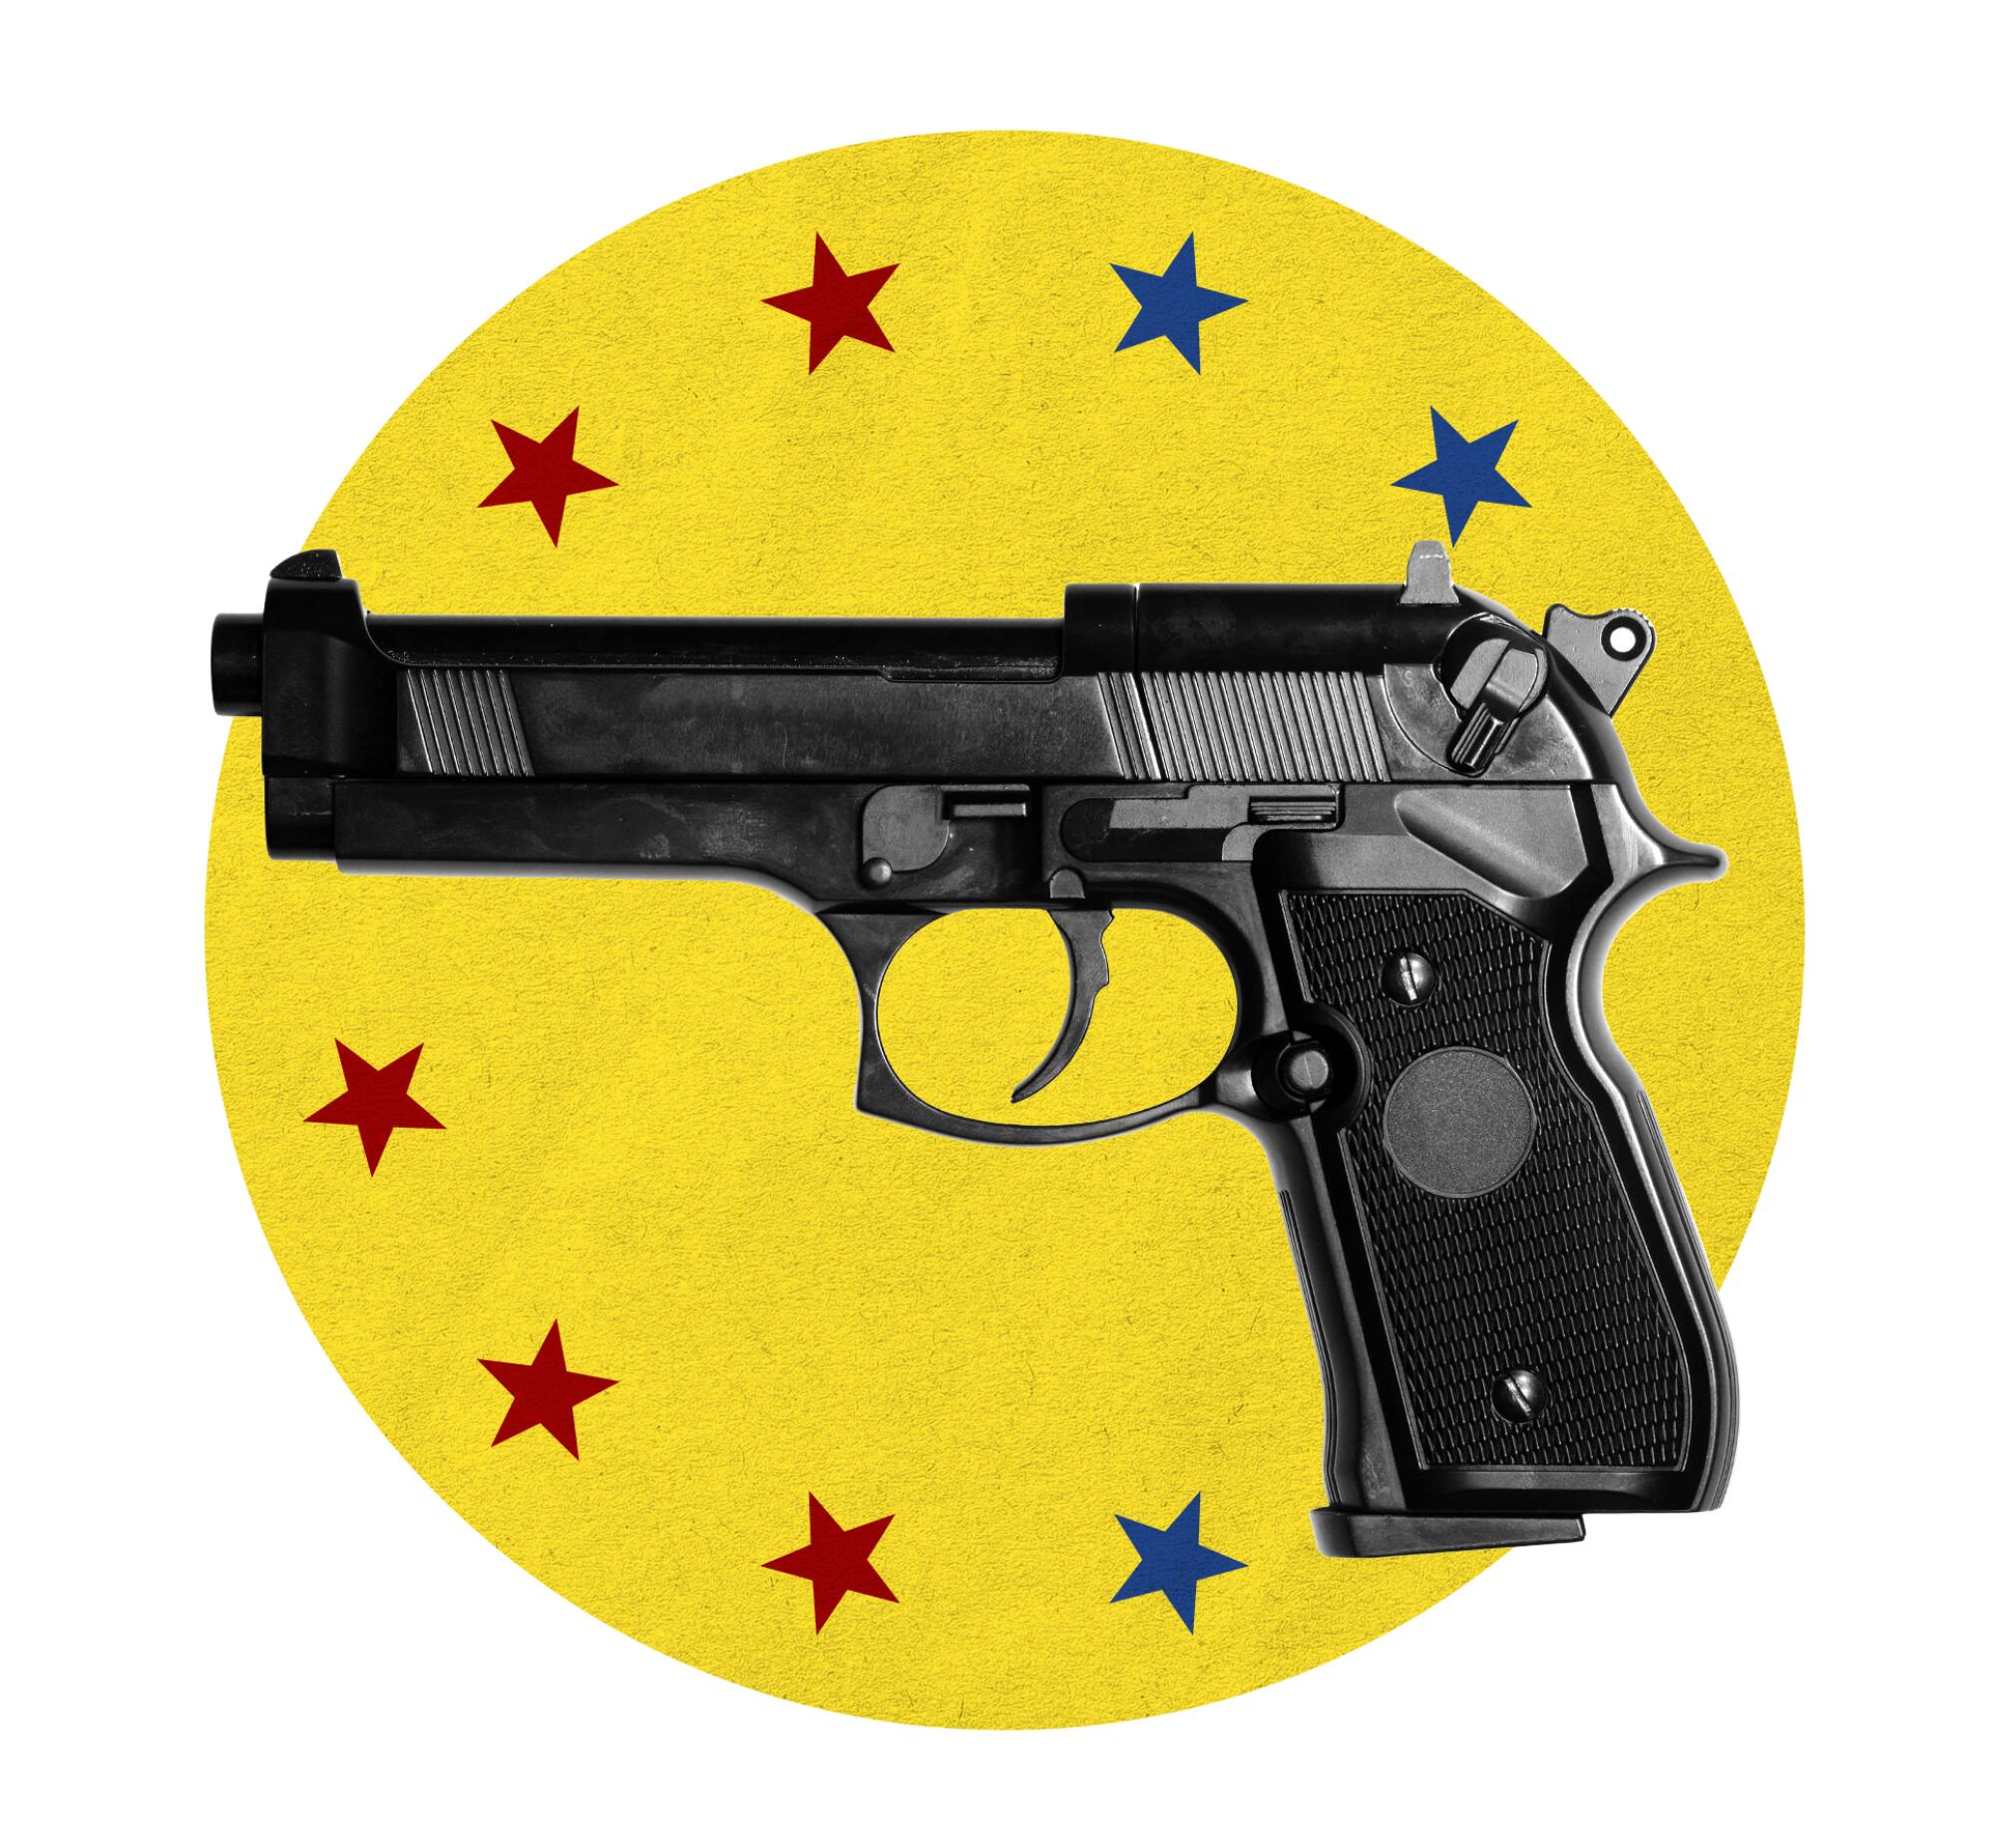 Photo of a gun in a yellow circle with stars